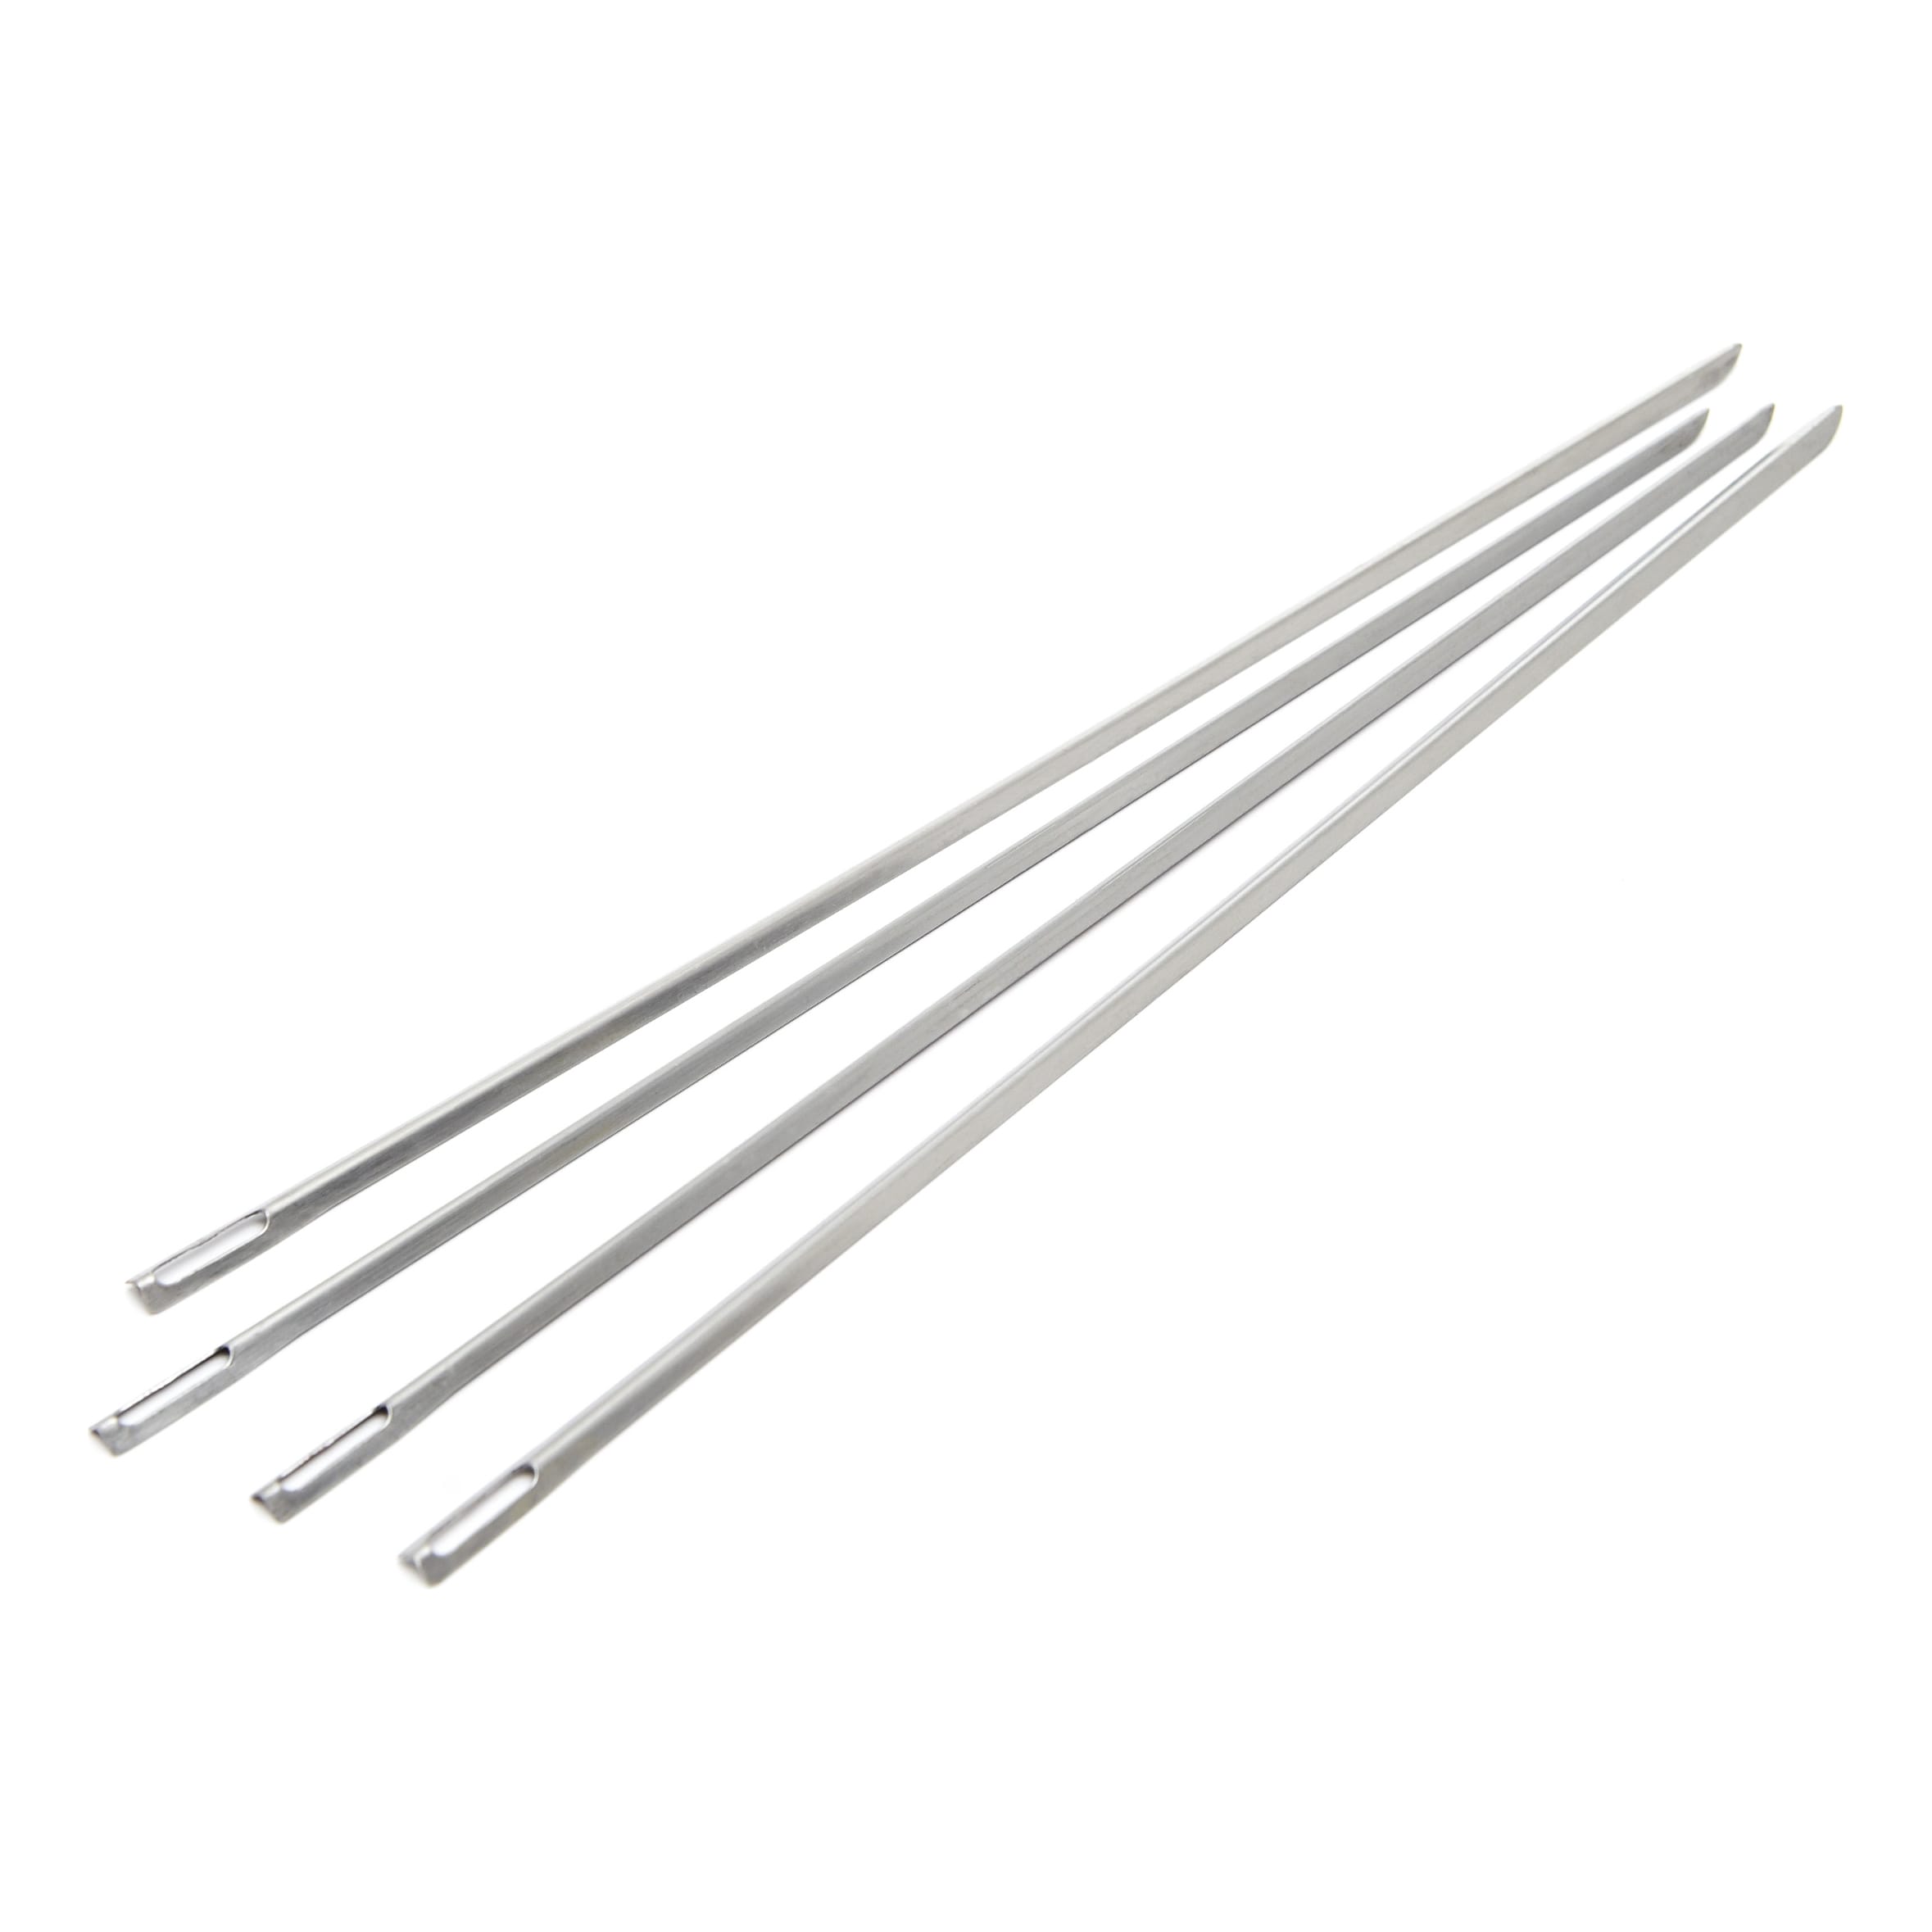 Grill Pro® 15” V-Shaped Slim Stainless Steel Skewers